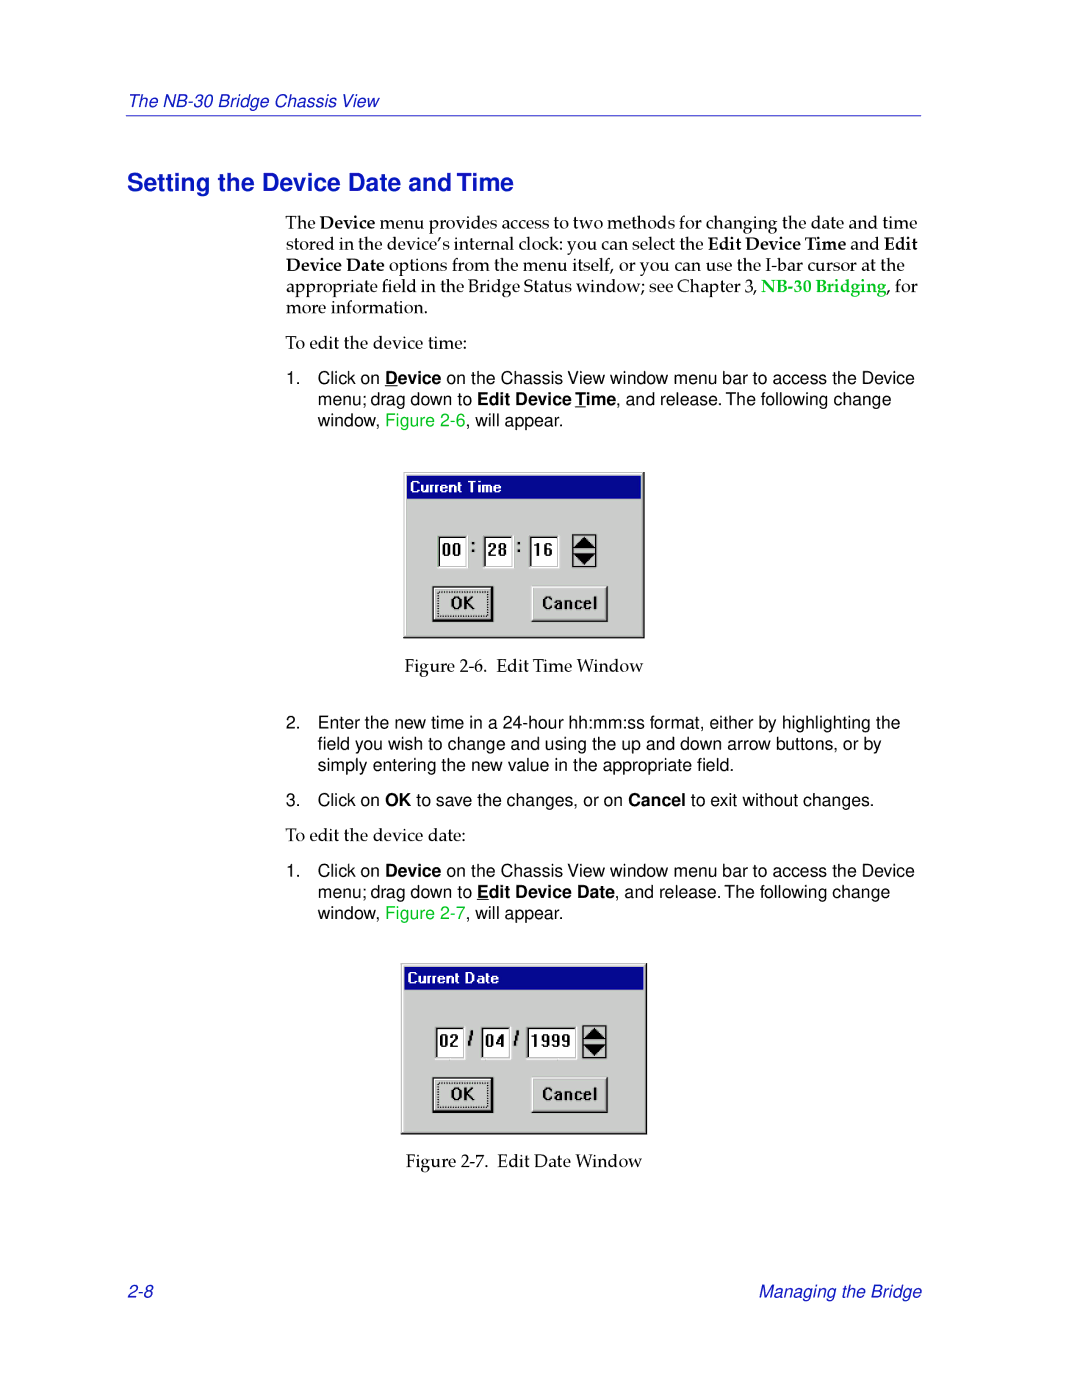 Cabletron Systems NB30 manual Setting the Device Date and Time, Edit Date Window 